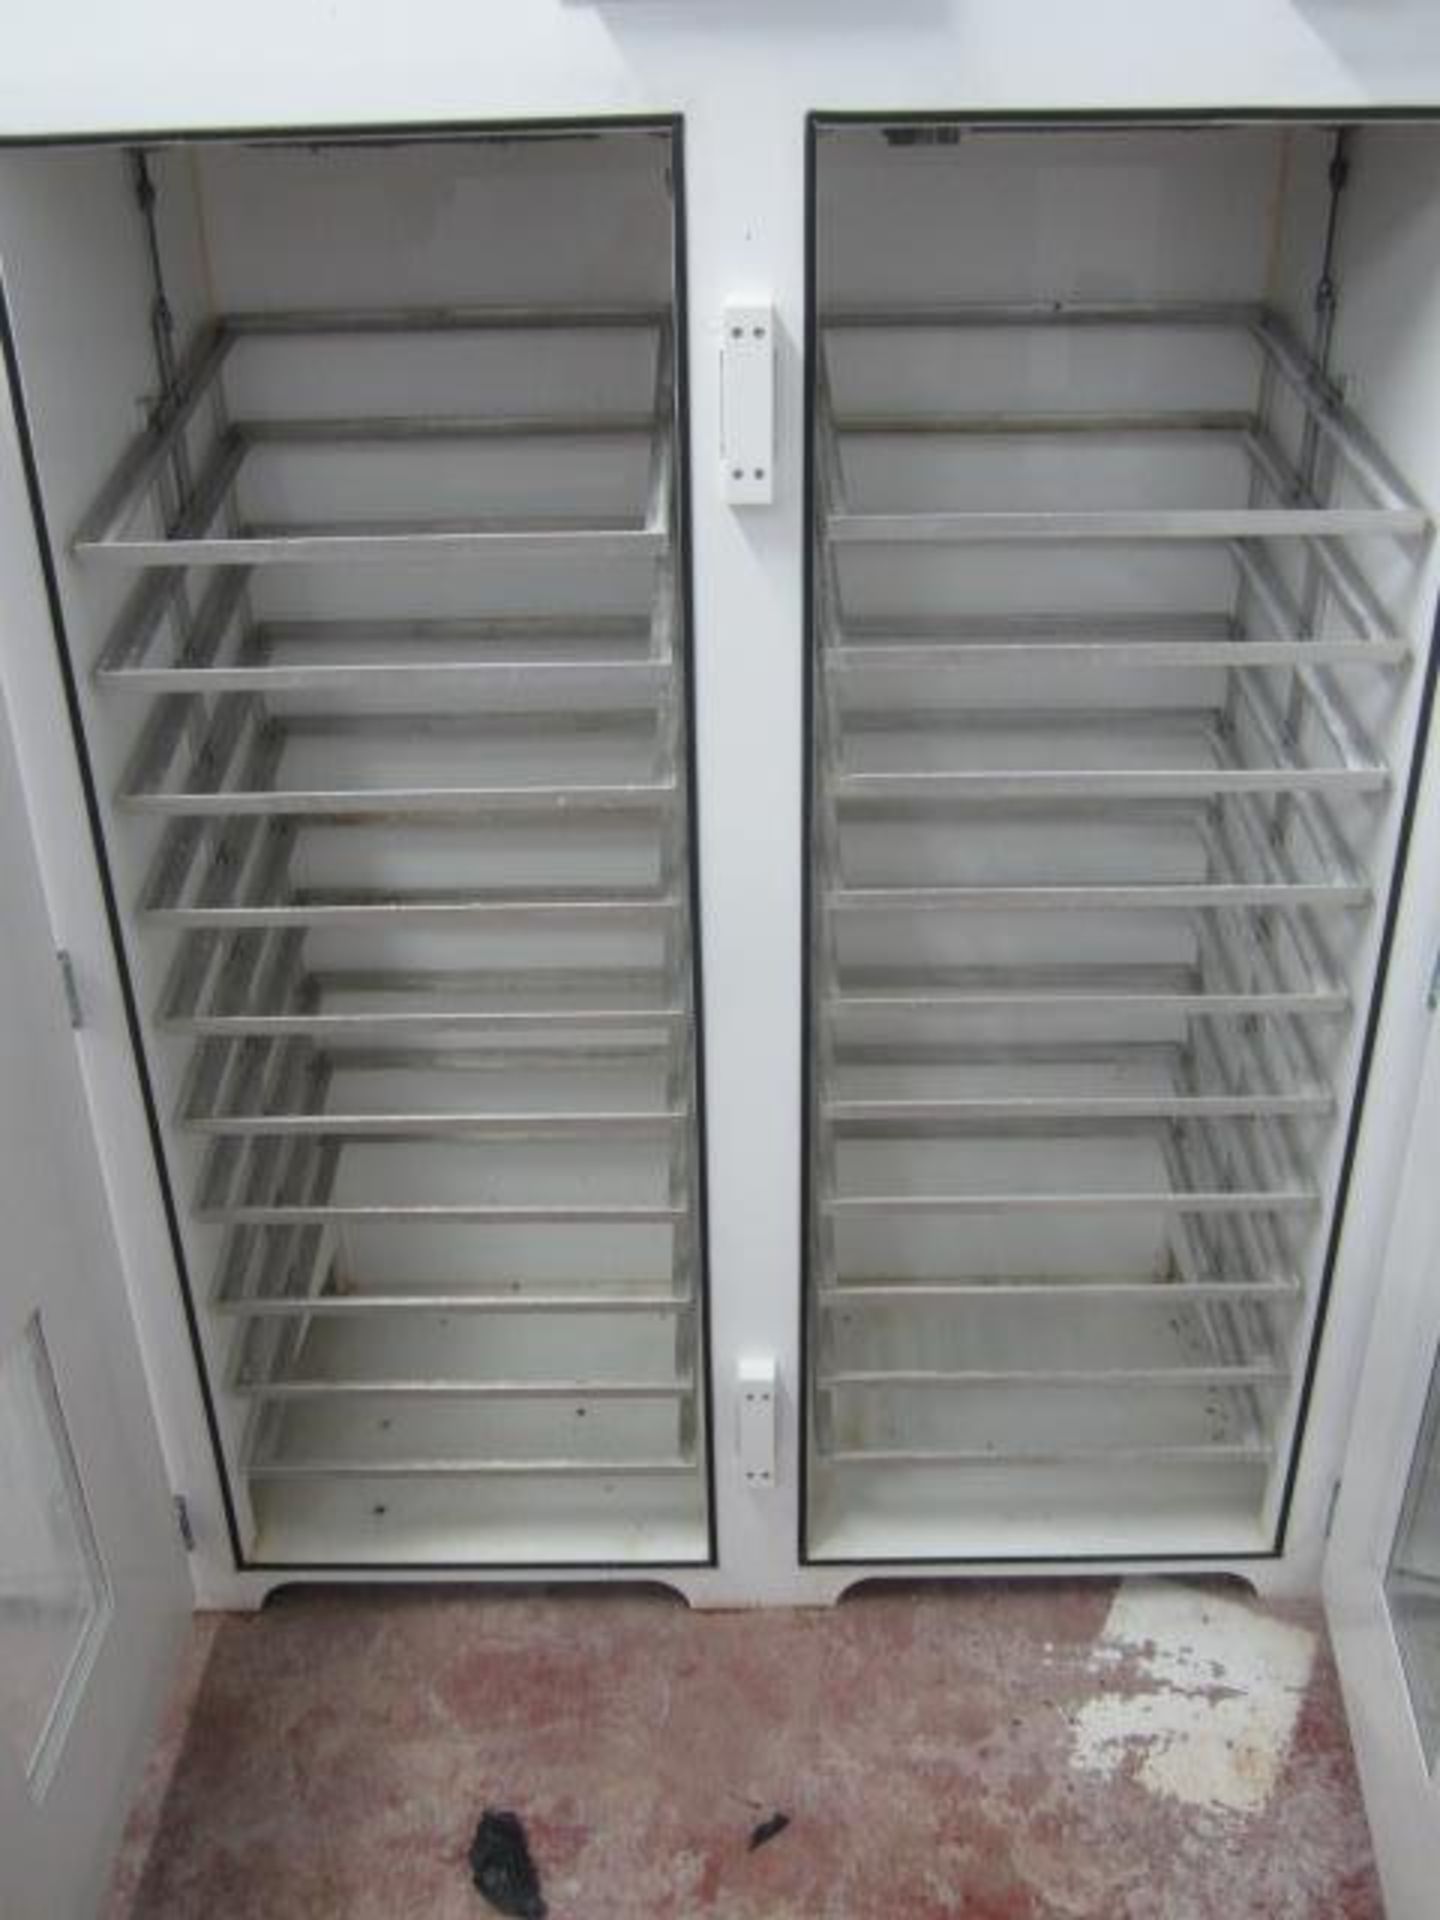 Heka-Brutgerate 2000 twin door egg incubators, digital temperature control with cooling/cooldown - Image 2 of 3